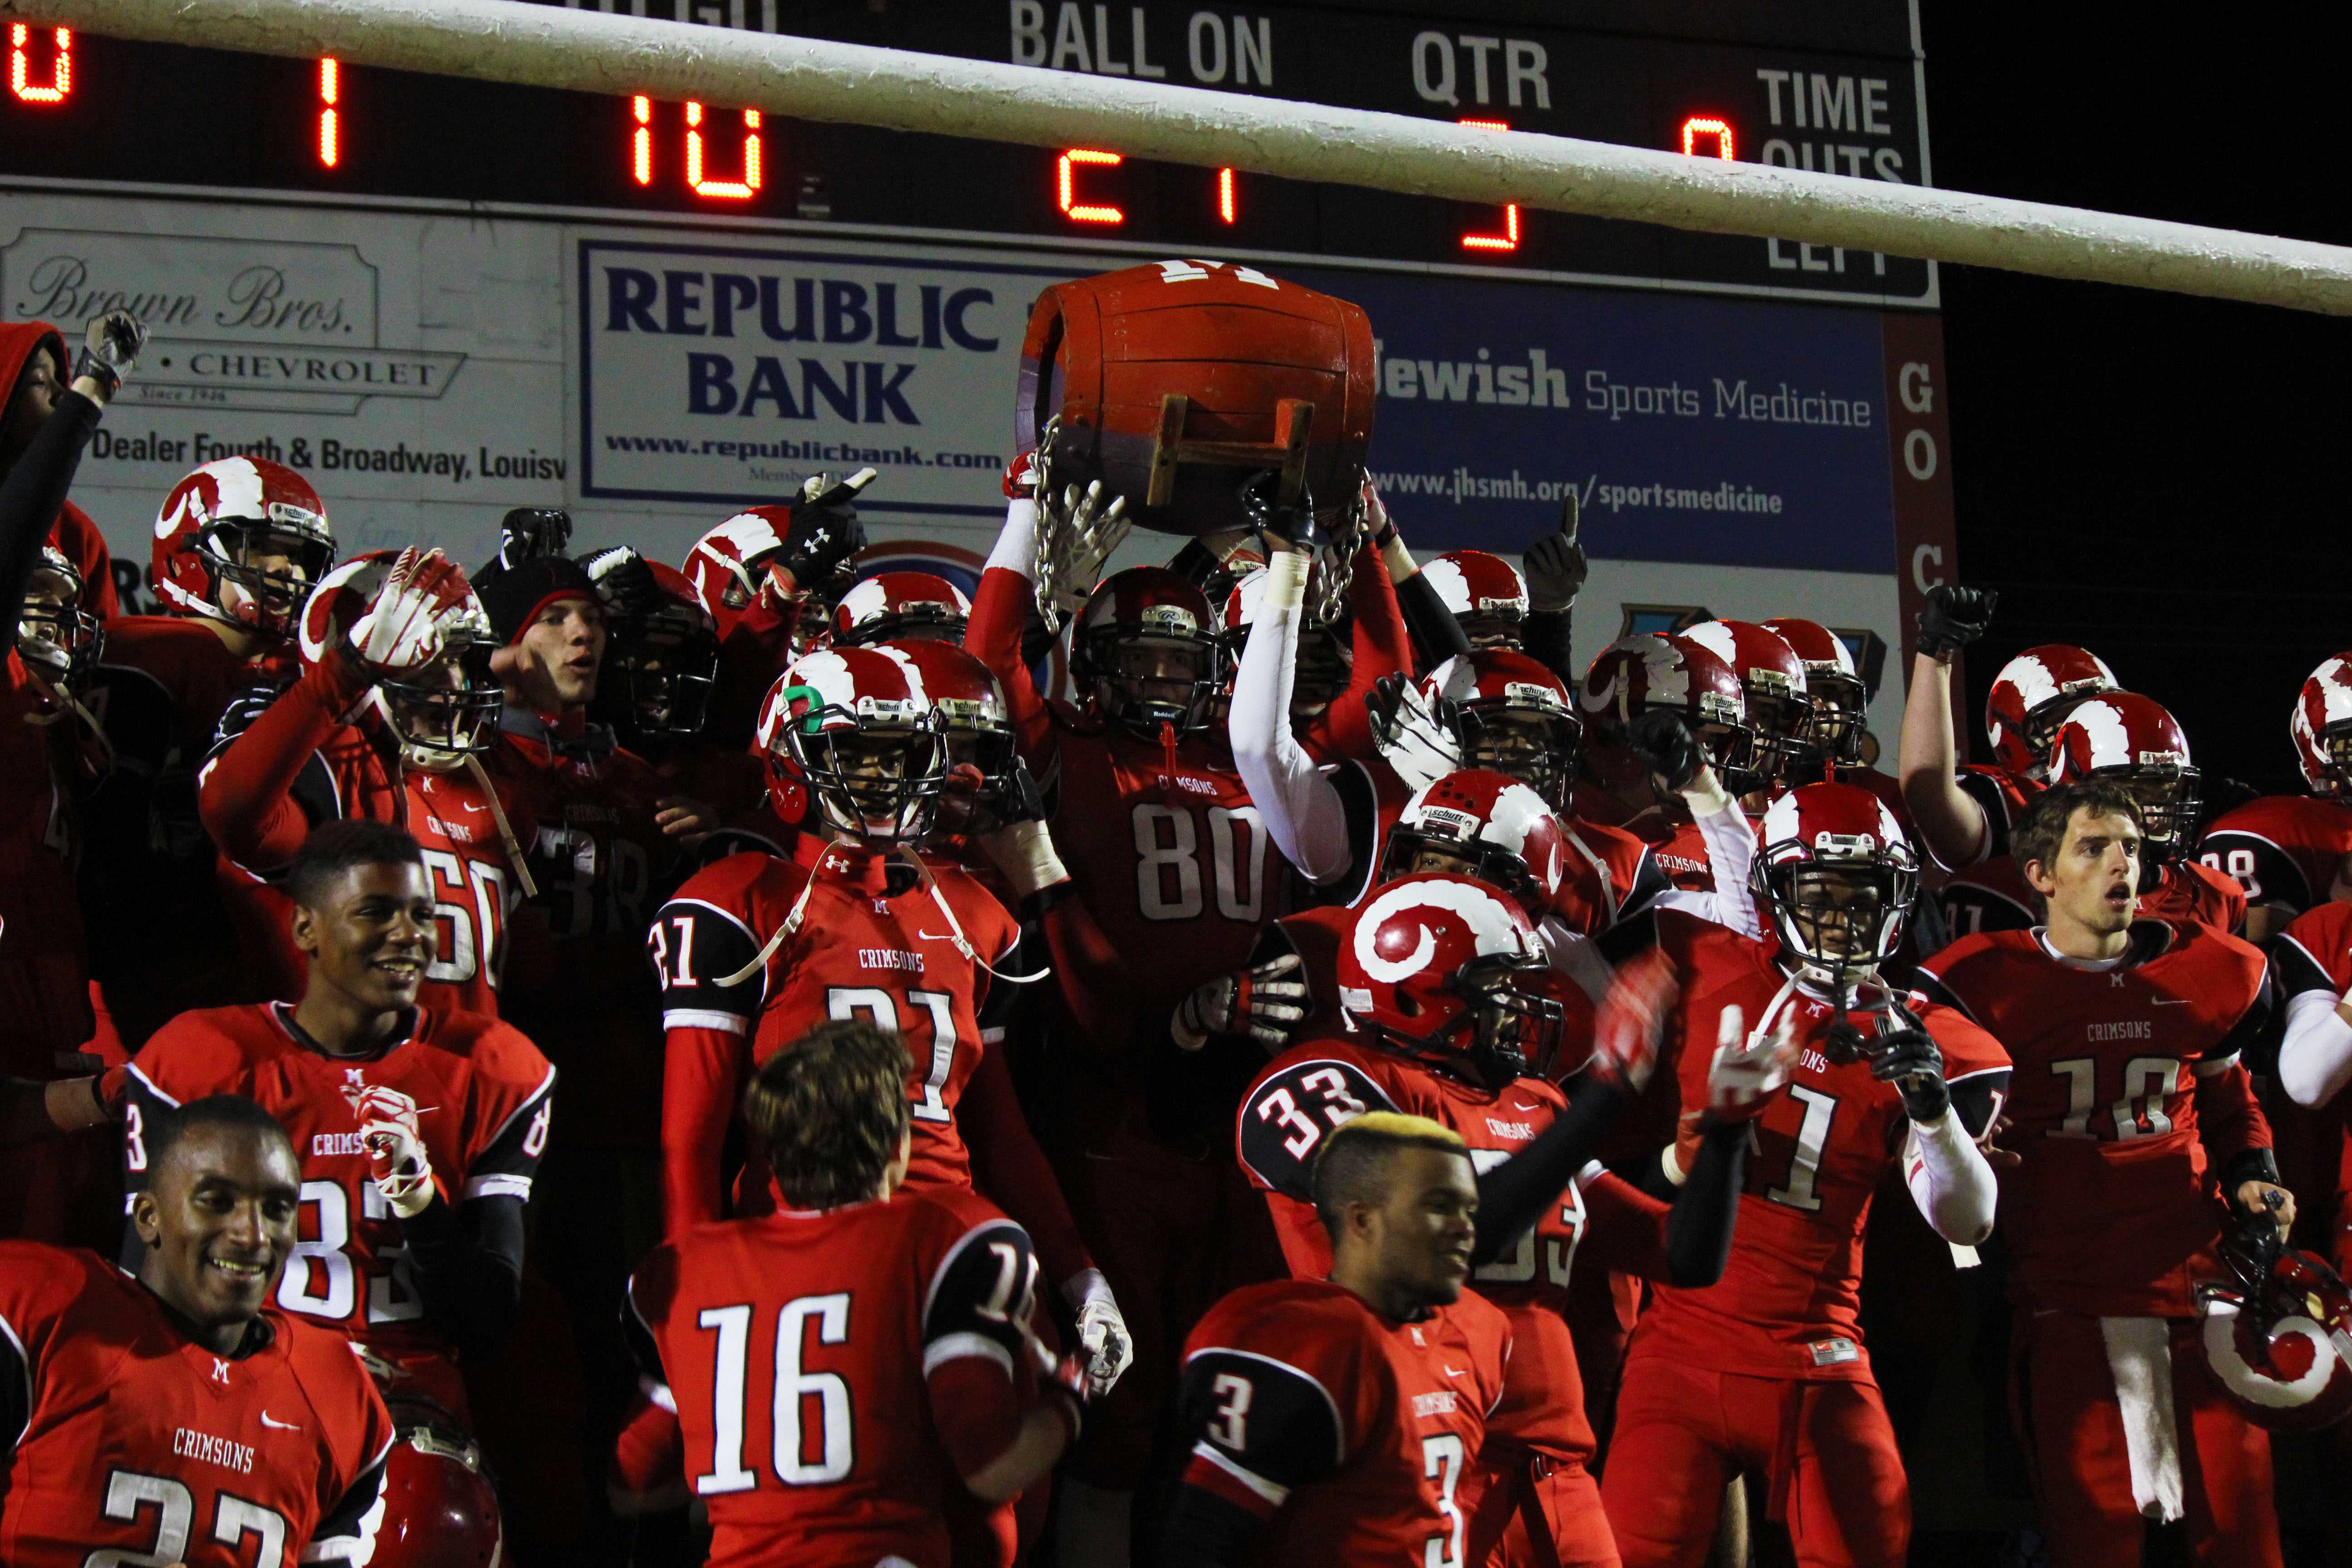 At the end of the game, the football team lines up to take a picture with the barrel right after their win.